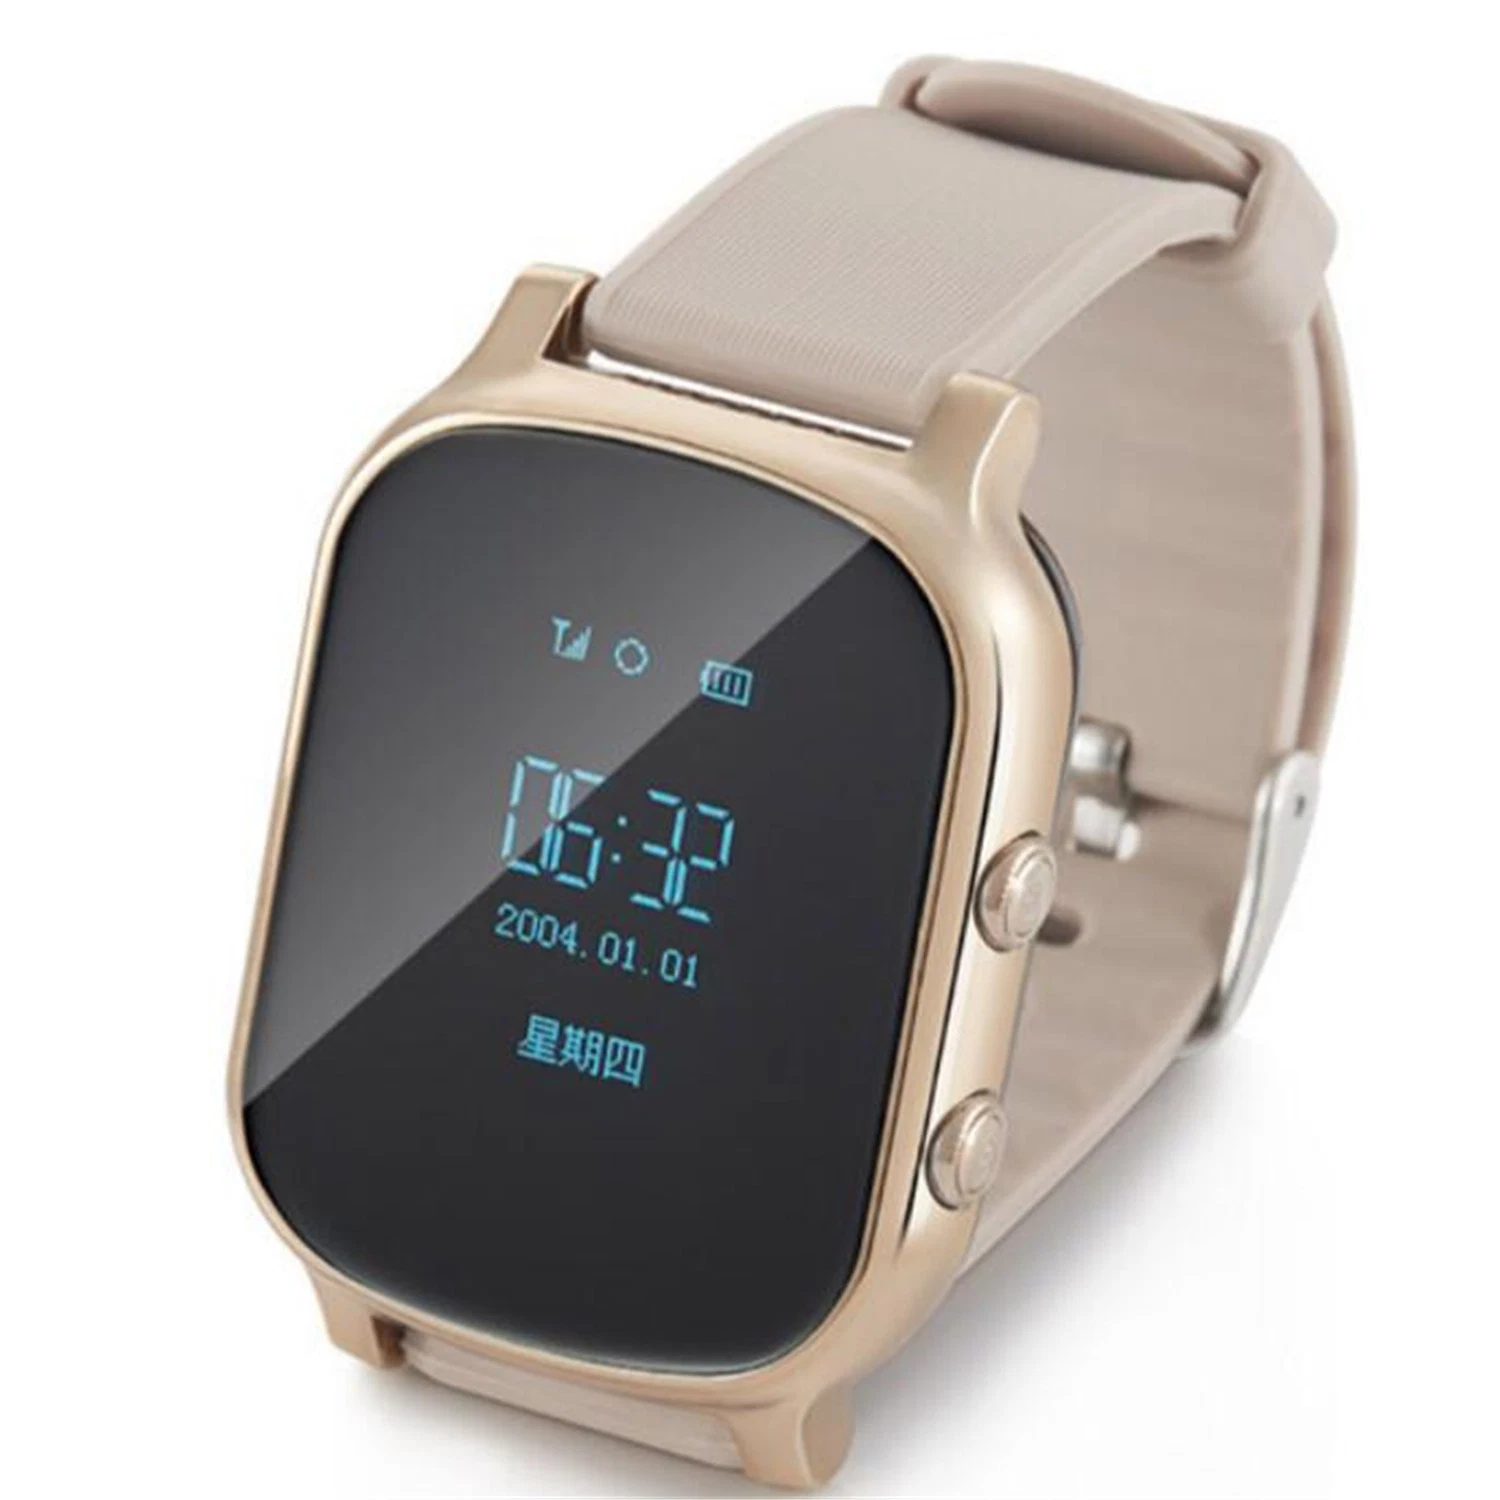 Personal Smart Watch GPS Tracking Device for Kids